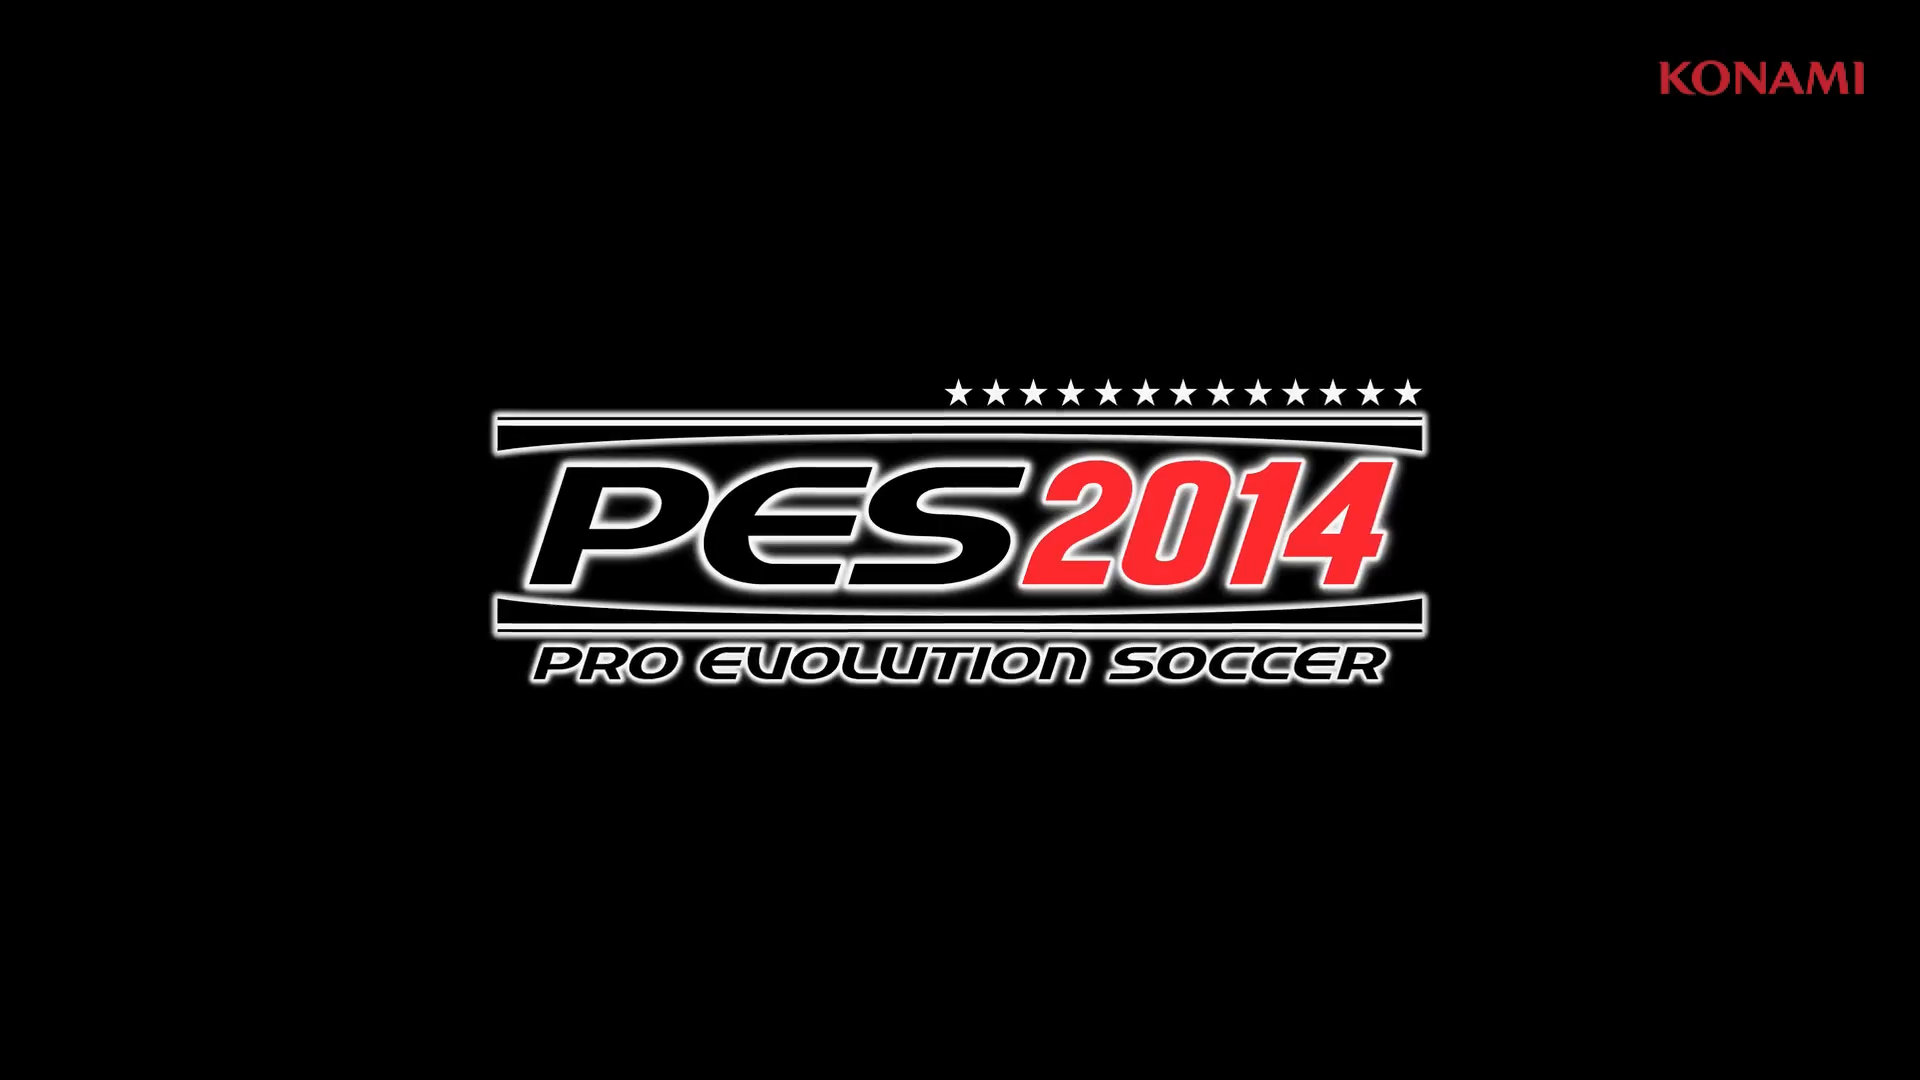 Pes Konami Game Wallpaper From Image Pictures HD